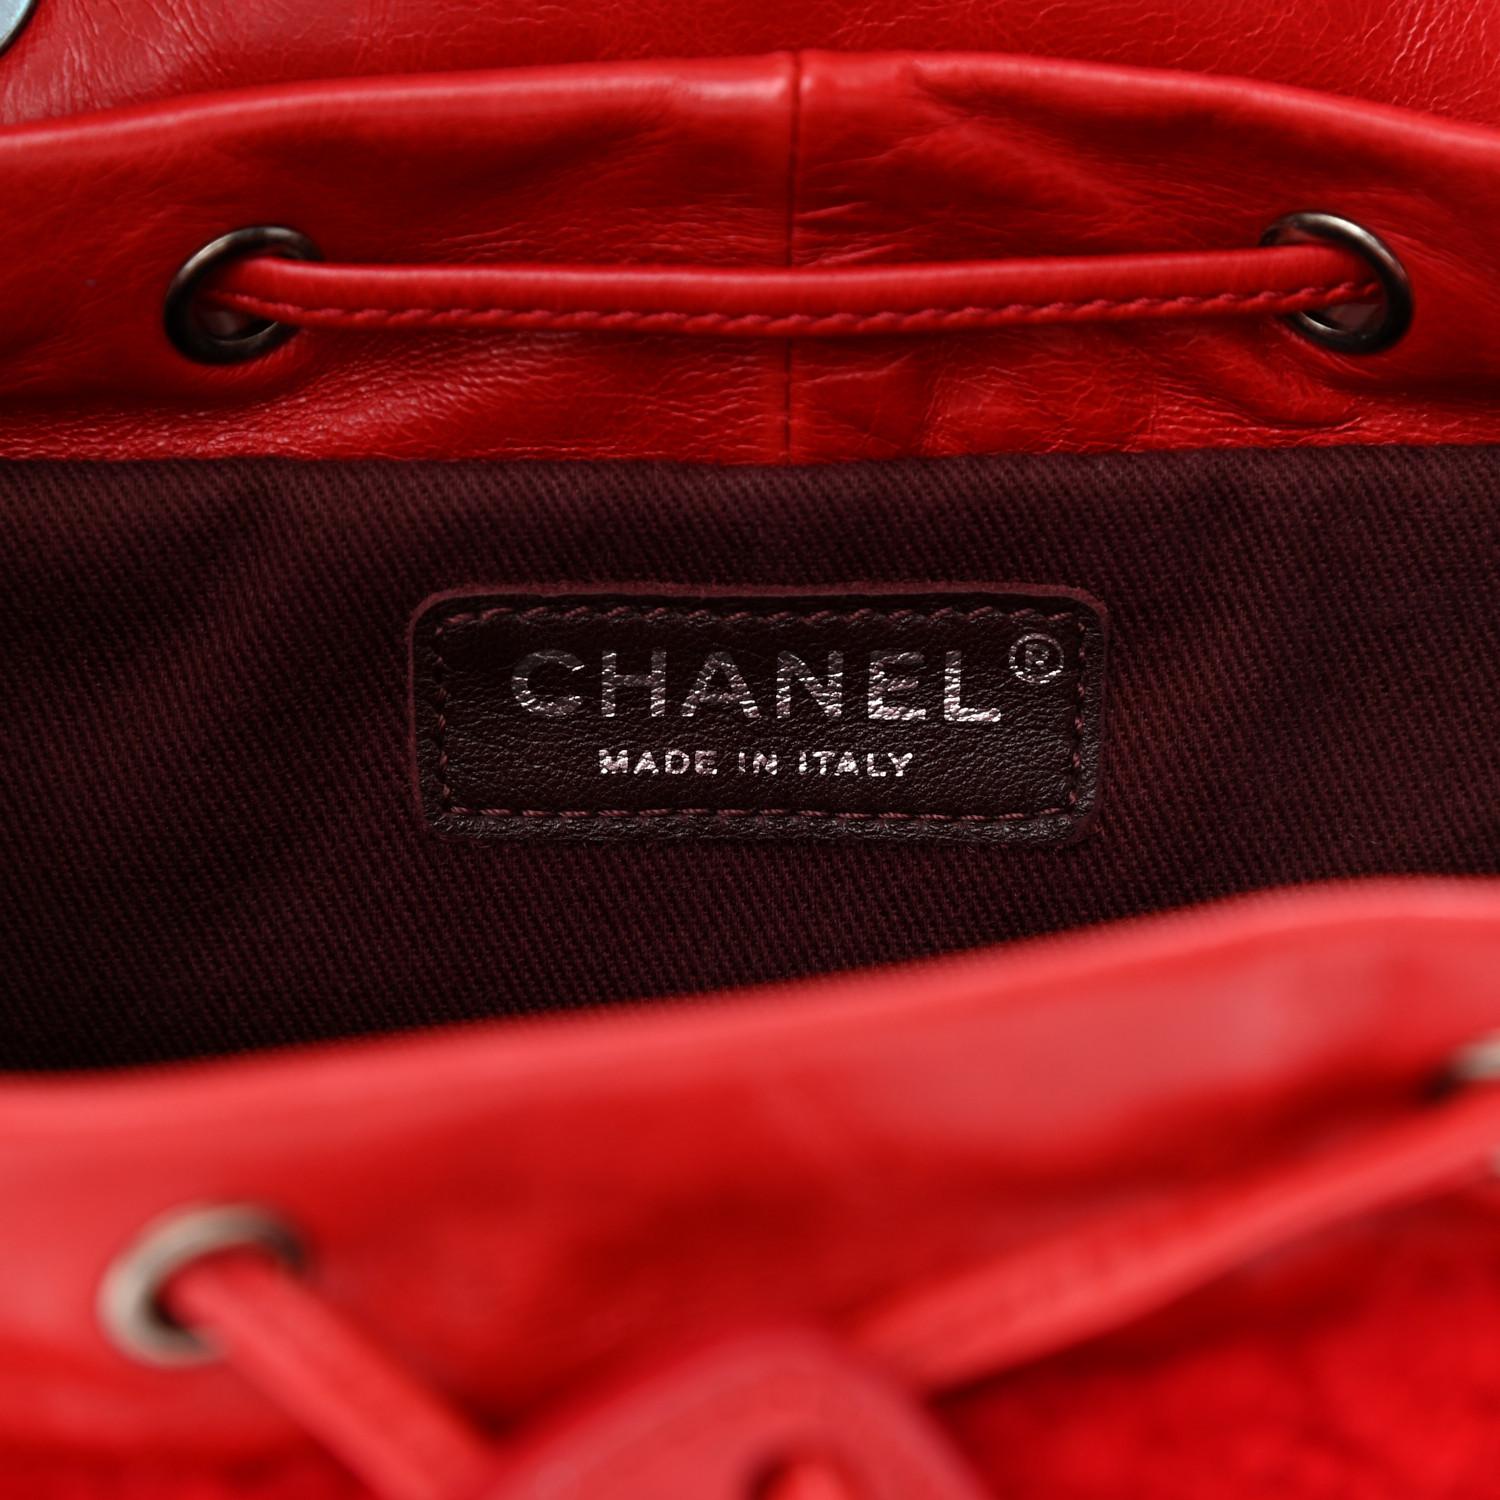 Chanel 2015 Paris-Salzburg Mountain Red Shearling Leather Rucksack Backpack Bag For Sale 2